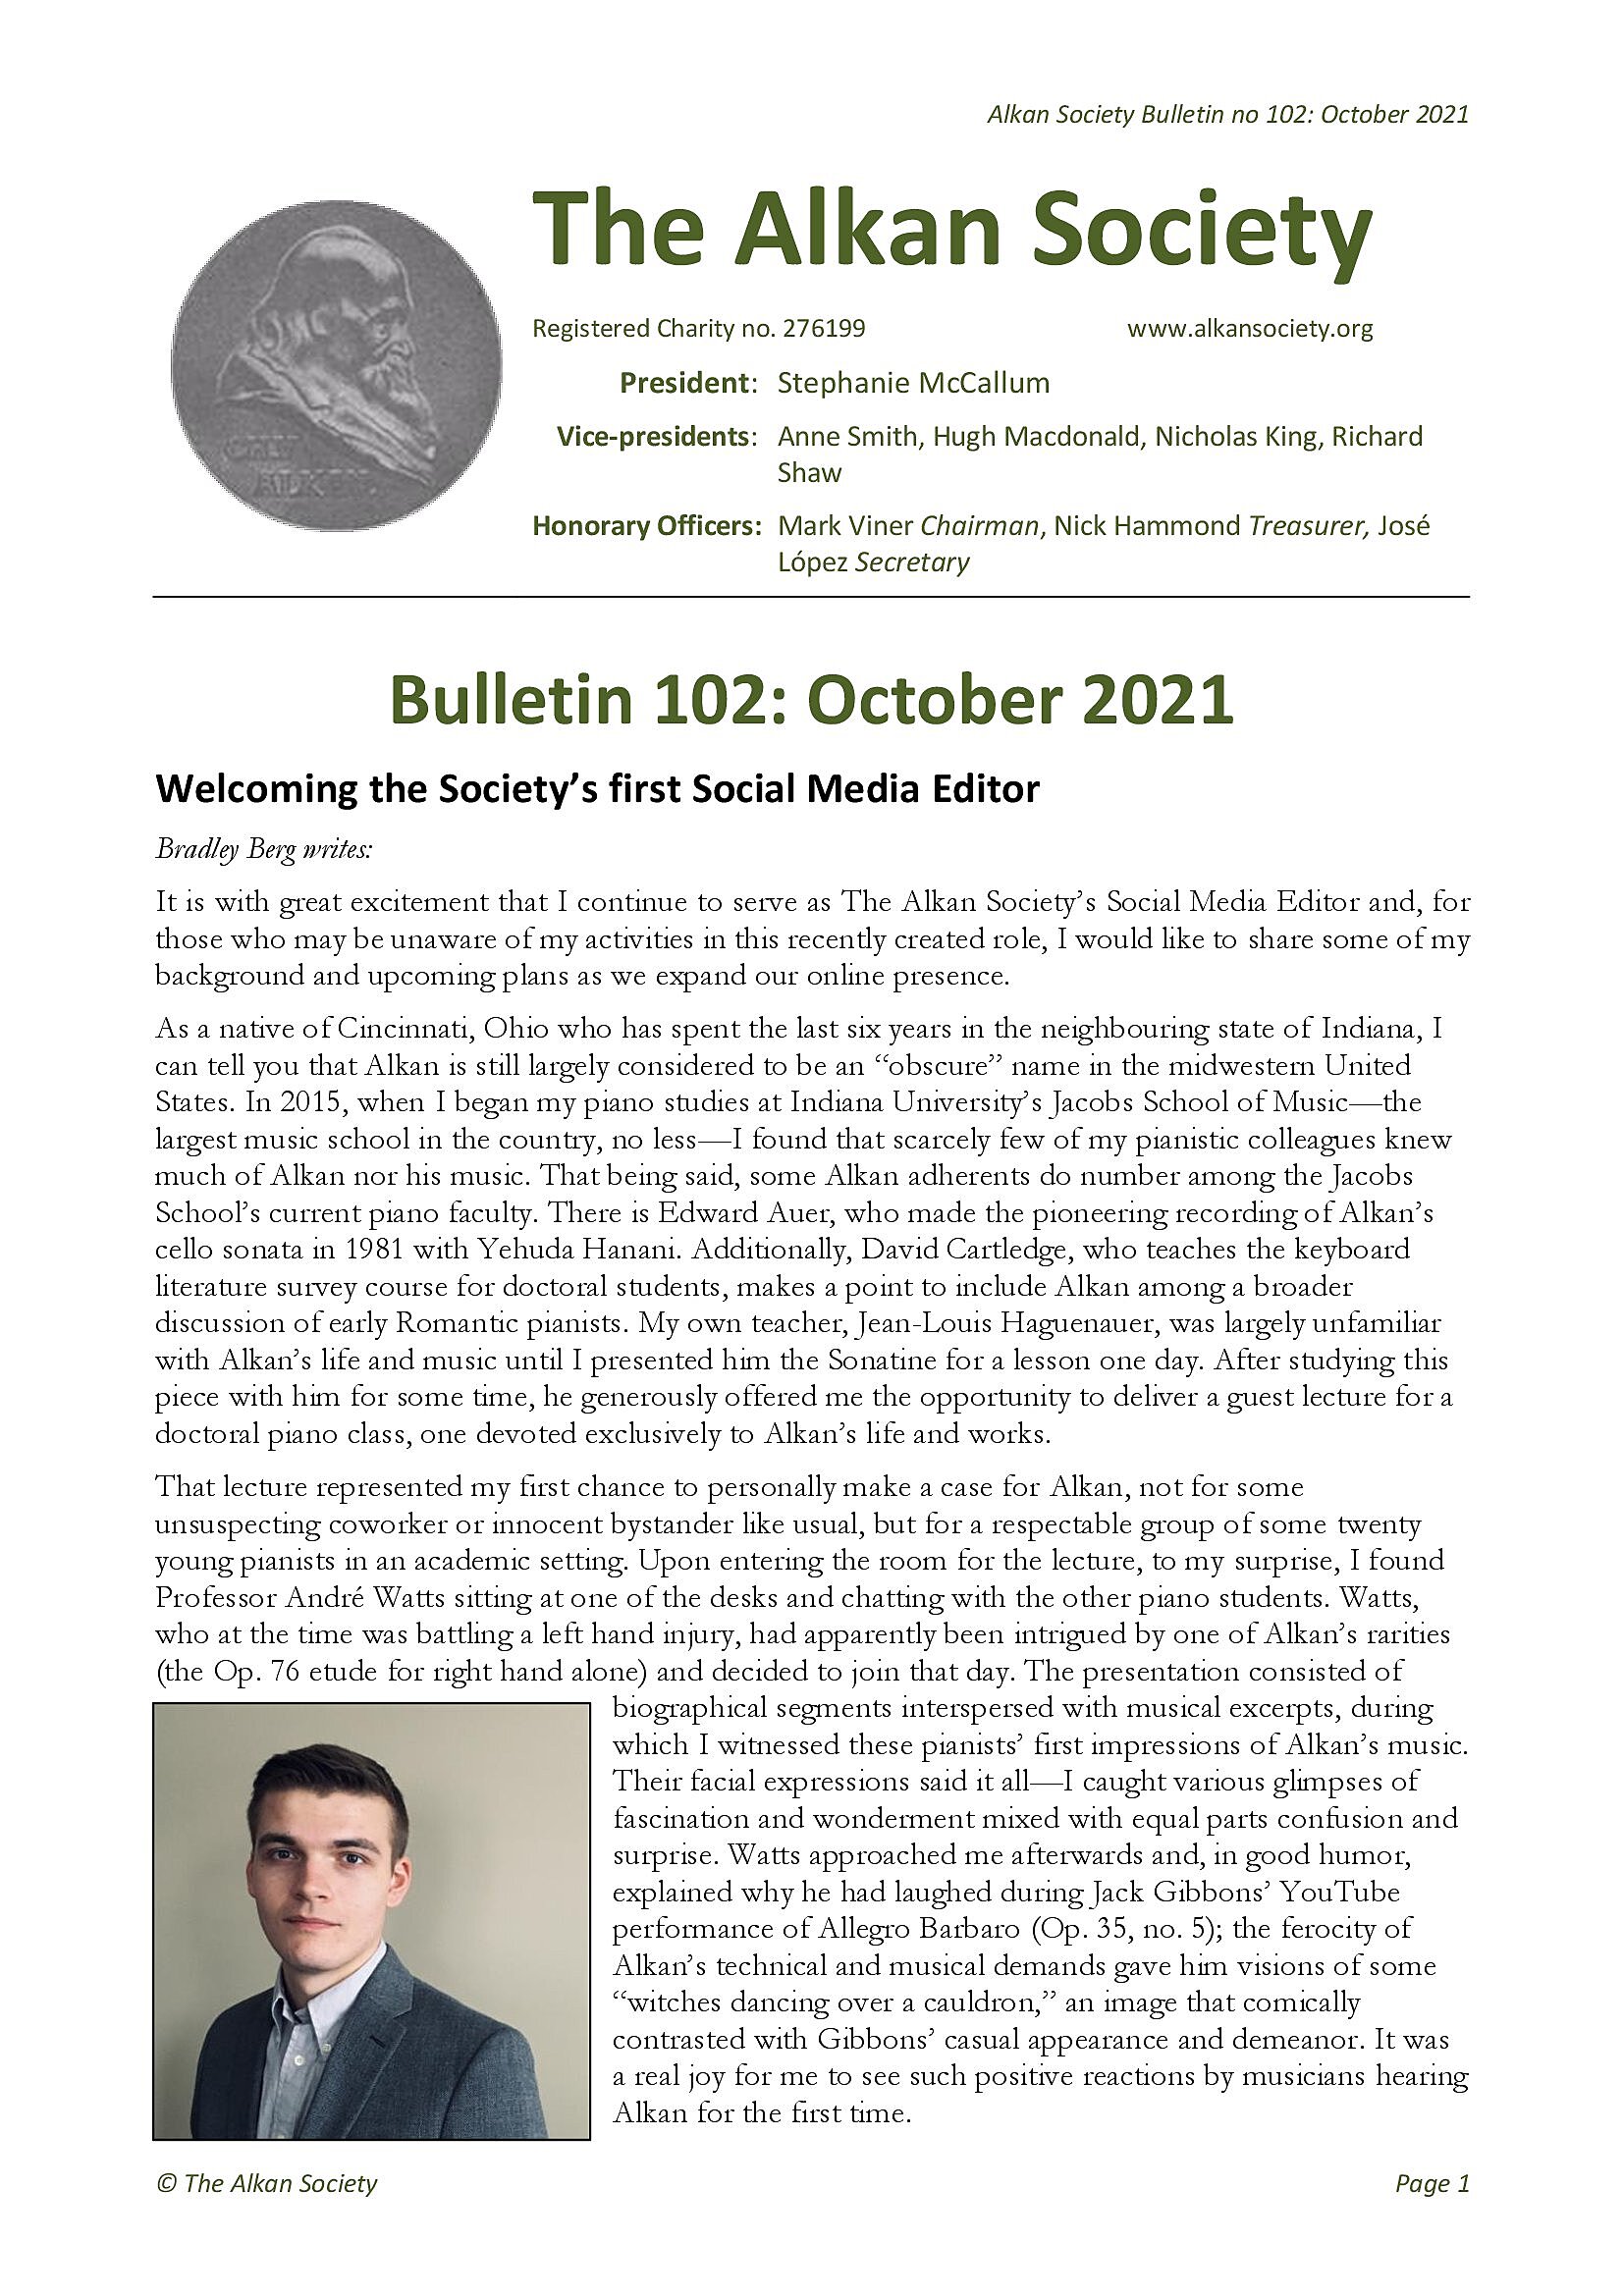 Bulletin 102 first page